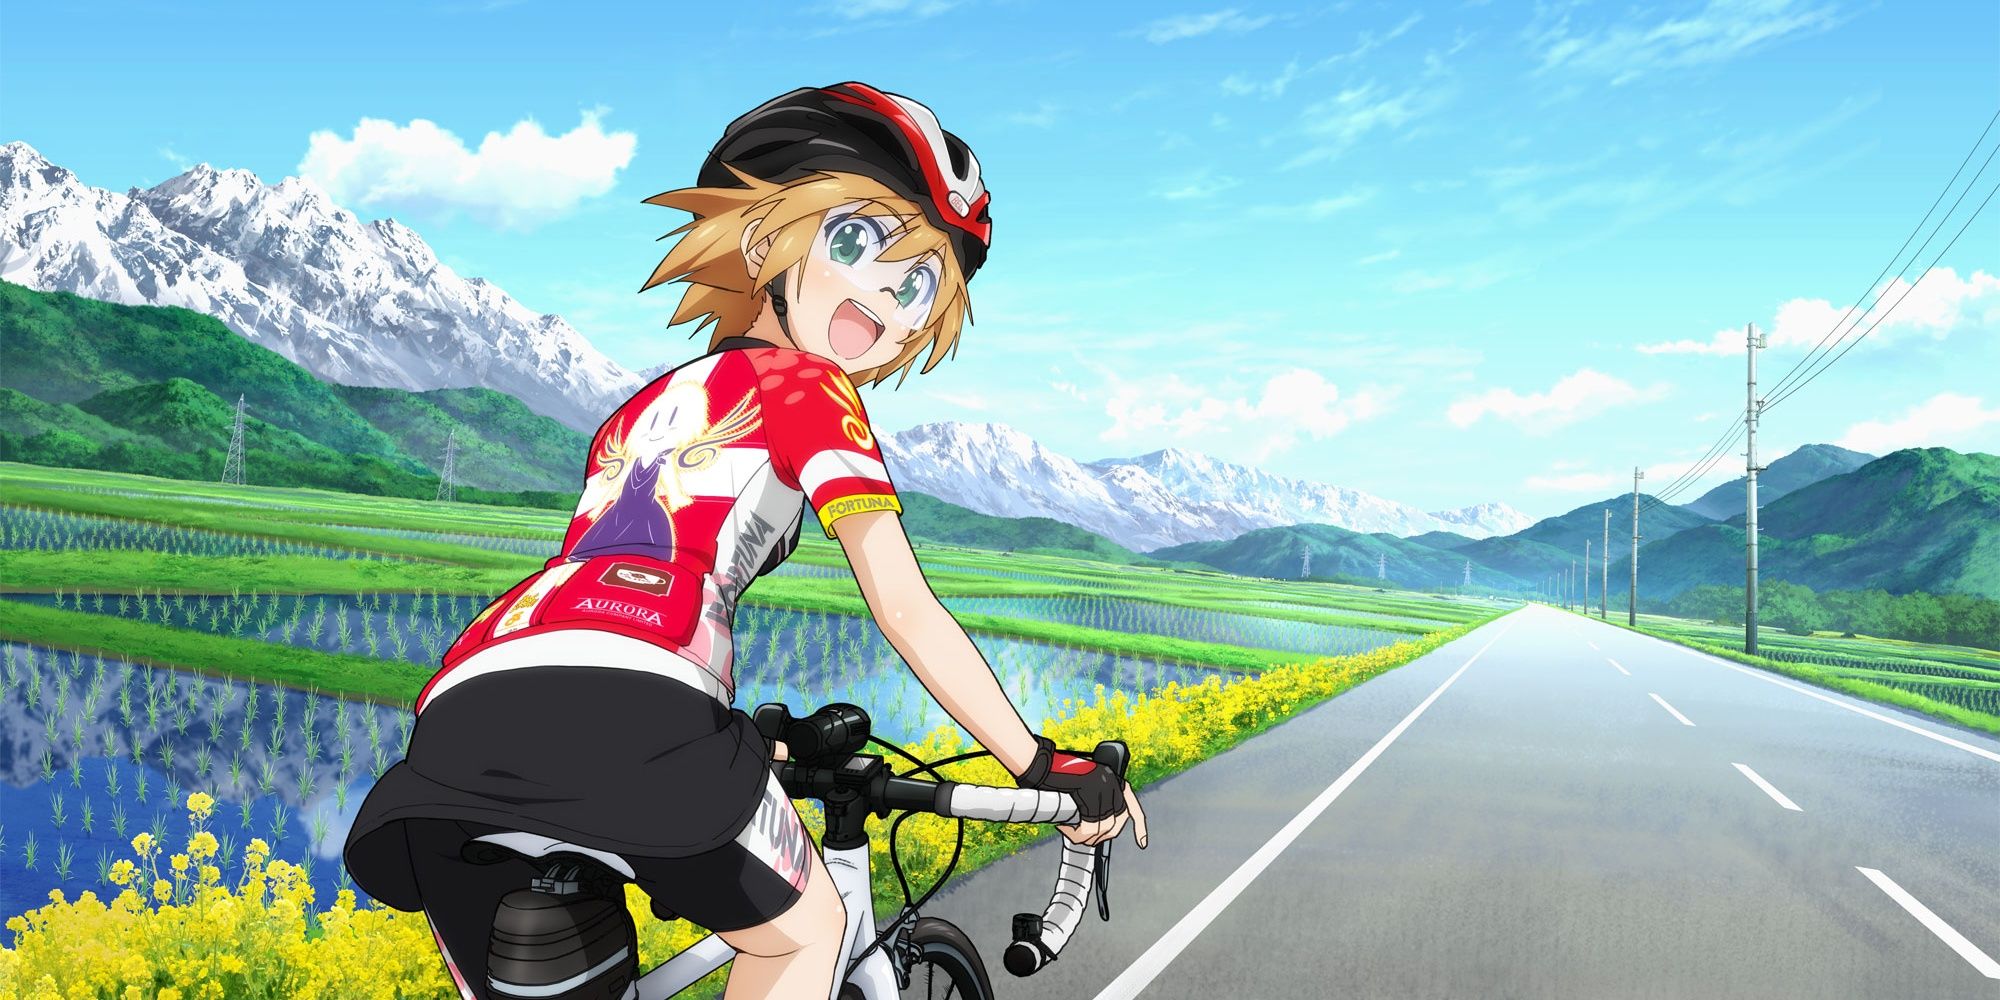 CapoVelo.com - Japanese Anime Brings Cycling to Life with 